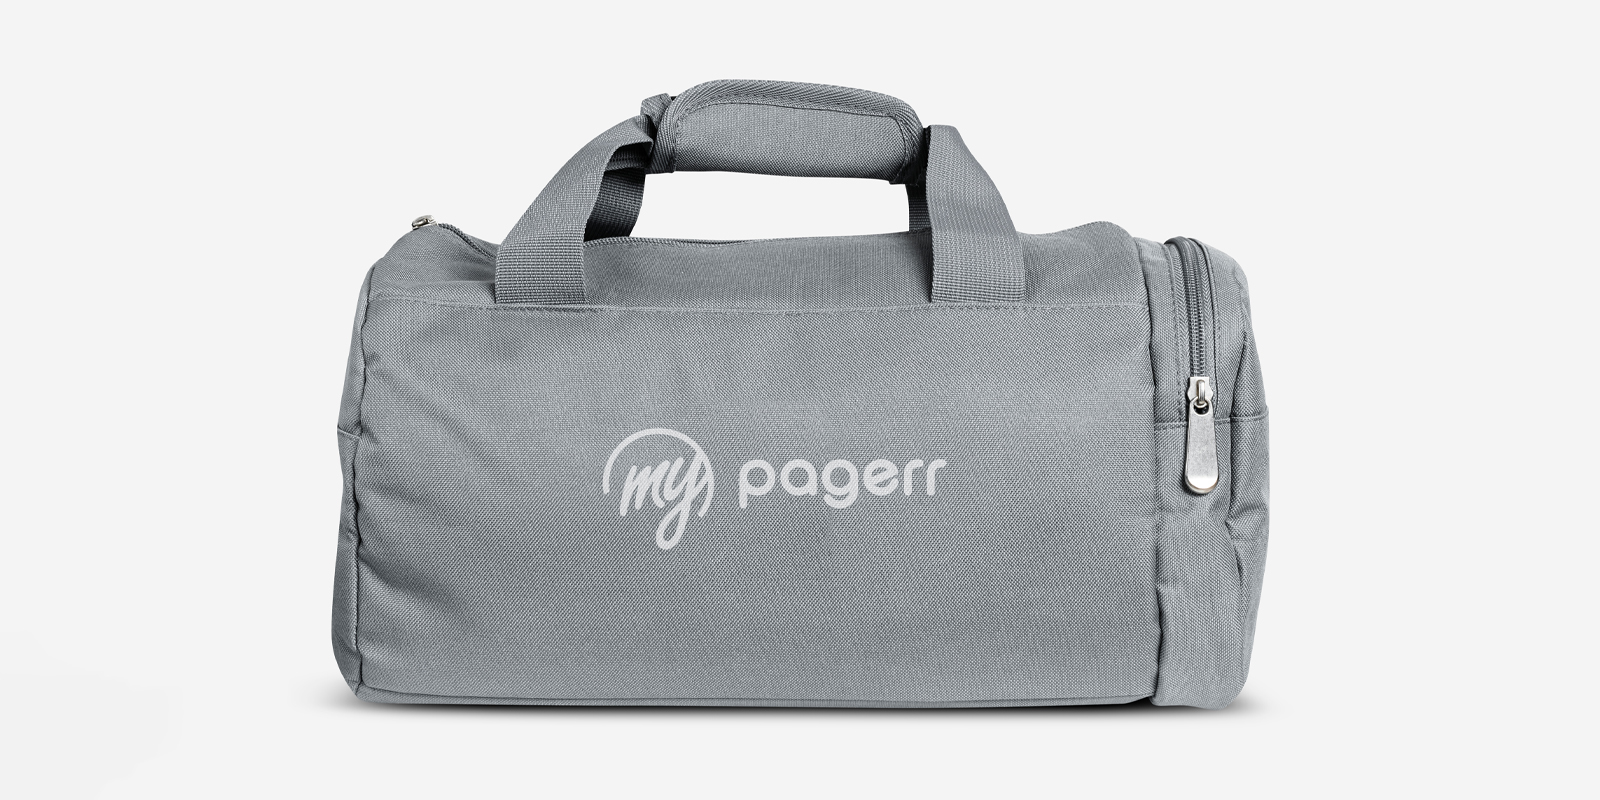 Duffel & gym bags in Darwin - Print with Pagerr